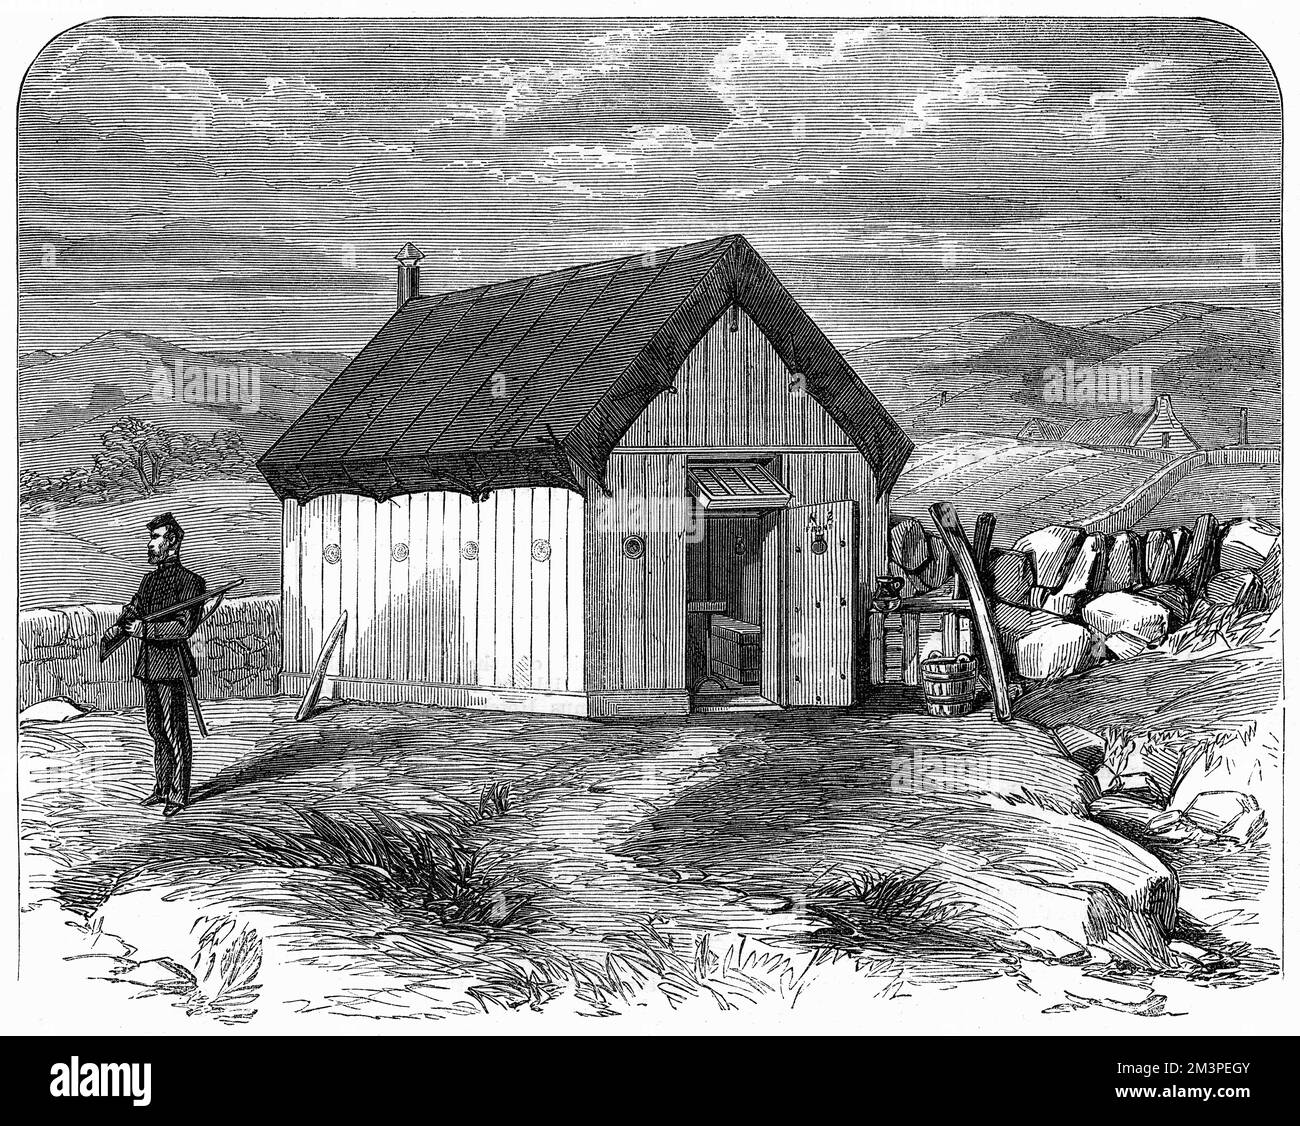 Portable hut for police in County Mayo, Ireland. A Royal Irish Constabulary policeman stands outside a portable hut used for temporary lodging when the armed constabulary are sent into a district where there has been unrest. This one is in Newfield, near Newport in the county of Mayo, overlooking Clew Bay.  1870 Stock Photo